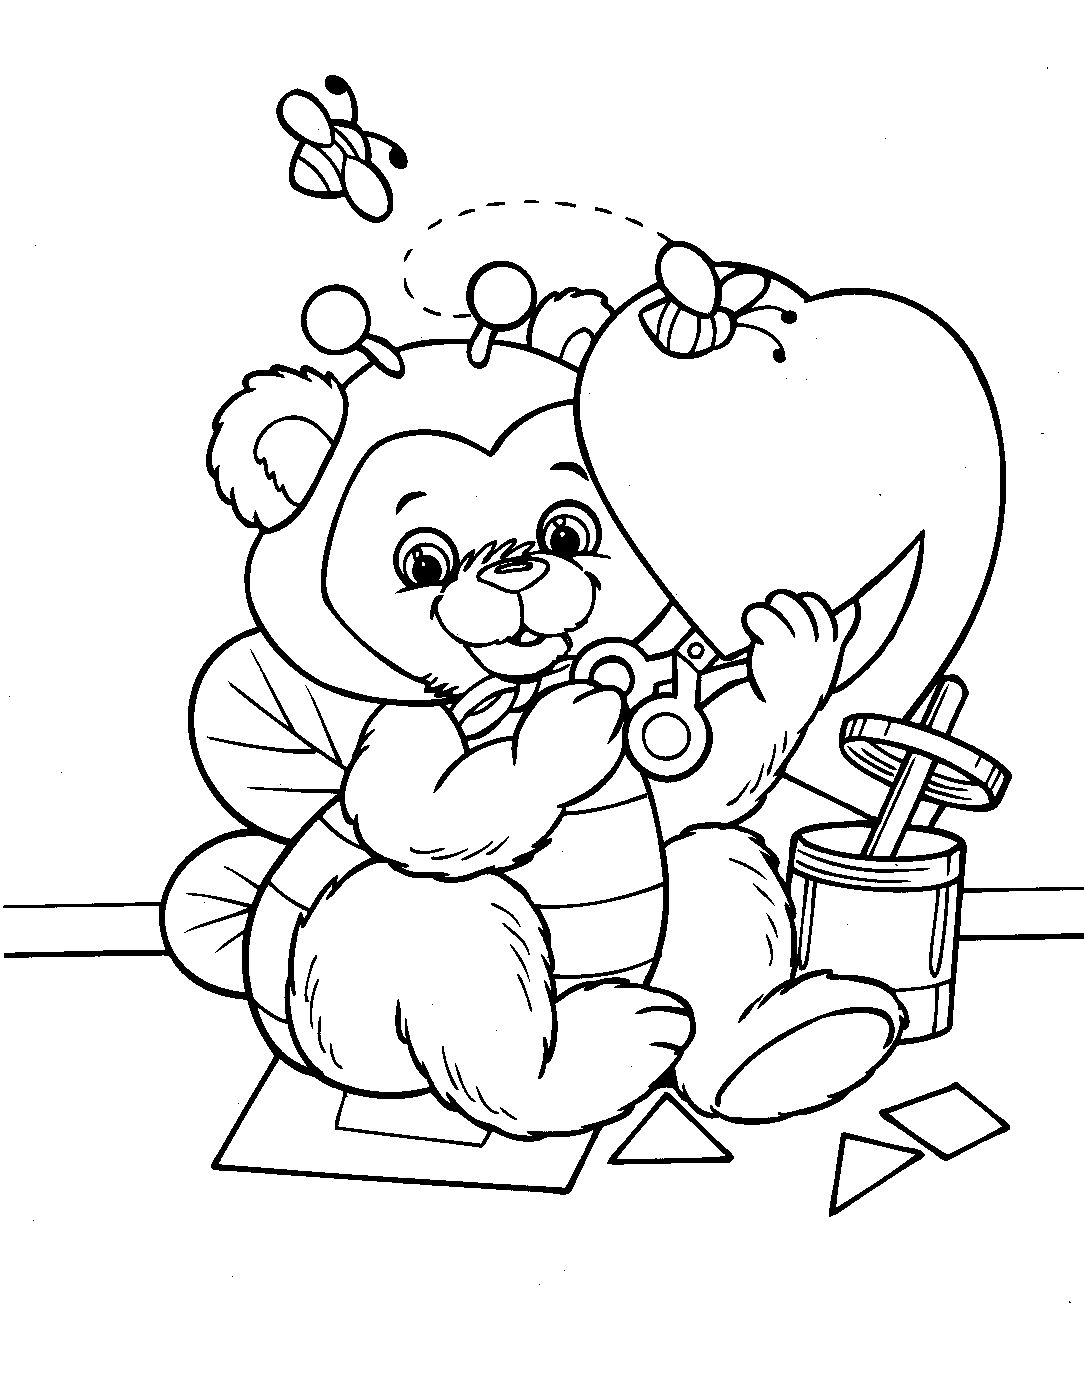 printable-cute-valentines-coloring-pages-for-adults-goimages-vip